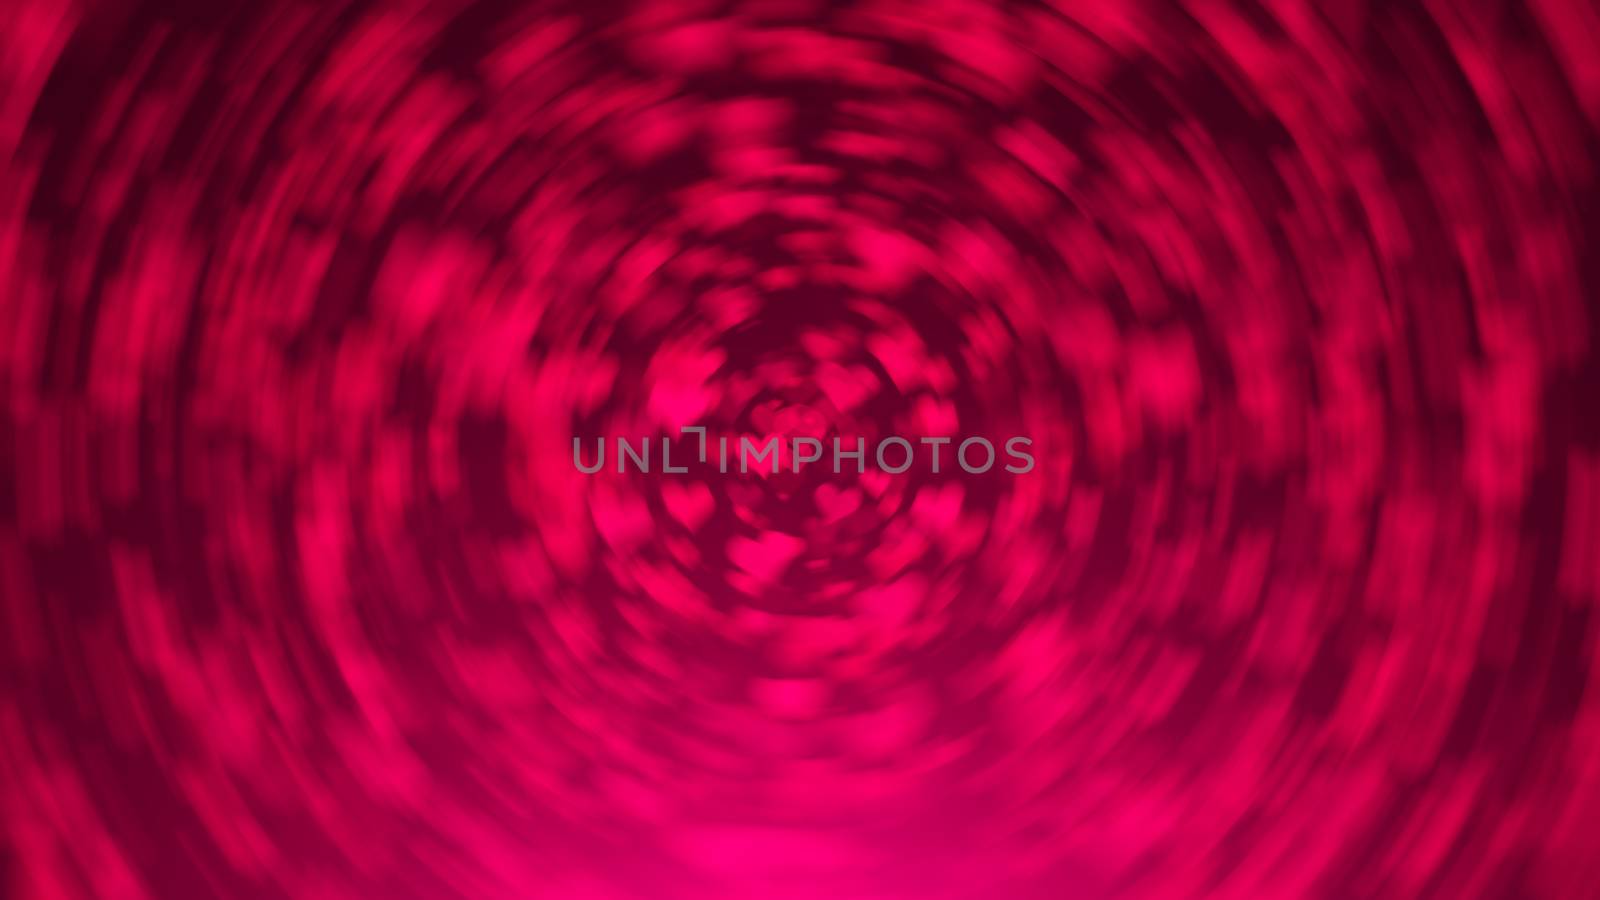 Abstract background with radial blur hearts. Digital illustration. 3d rendering